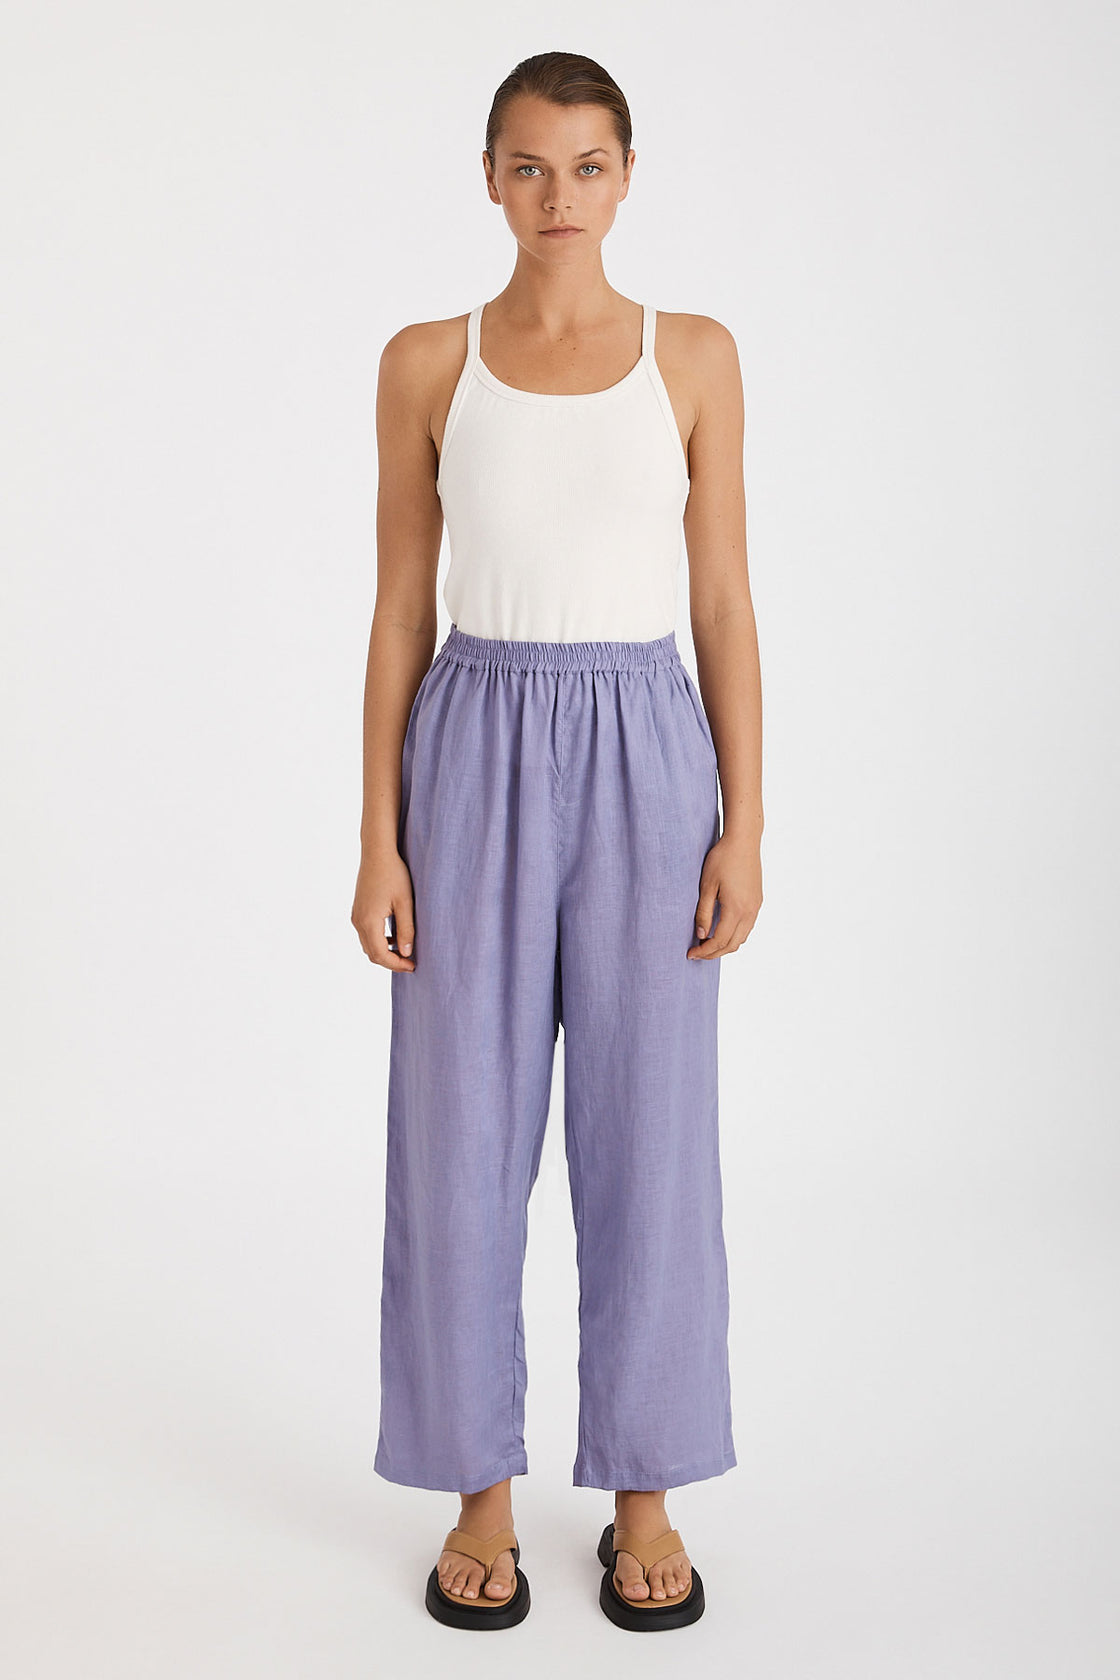 zulu and zephyr - lilac linen pant - lilac